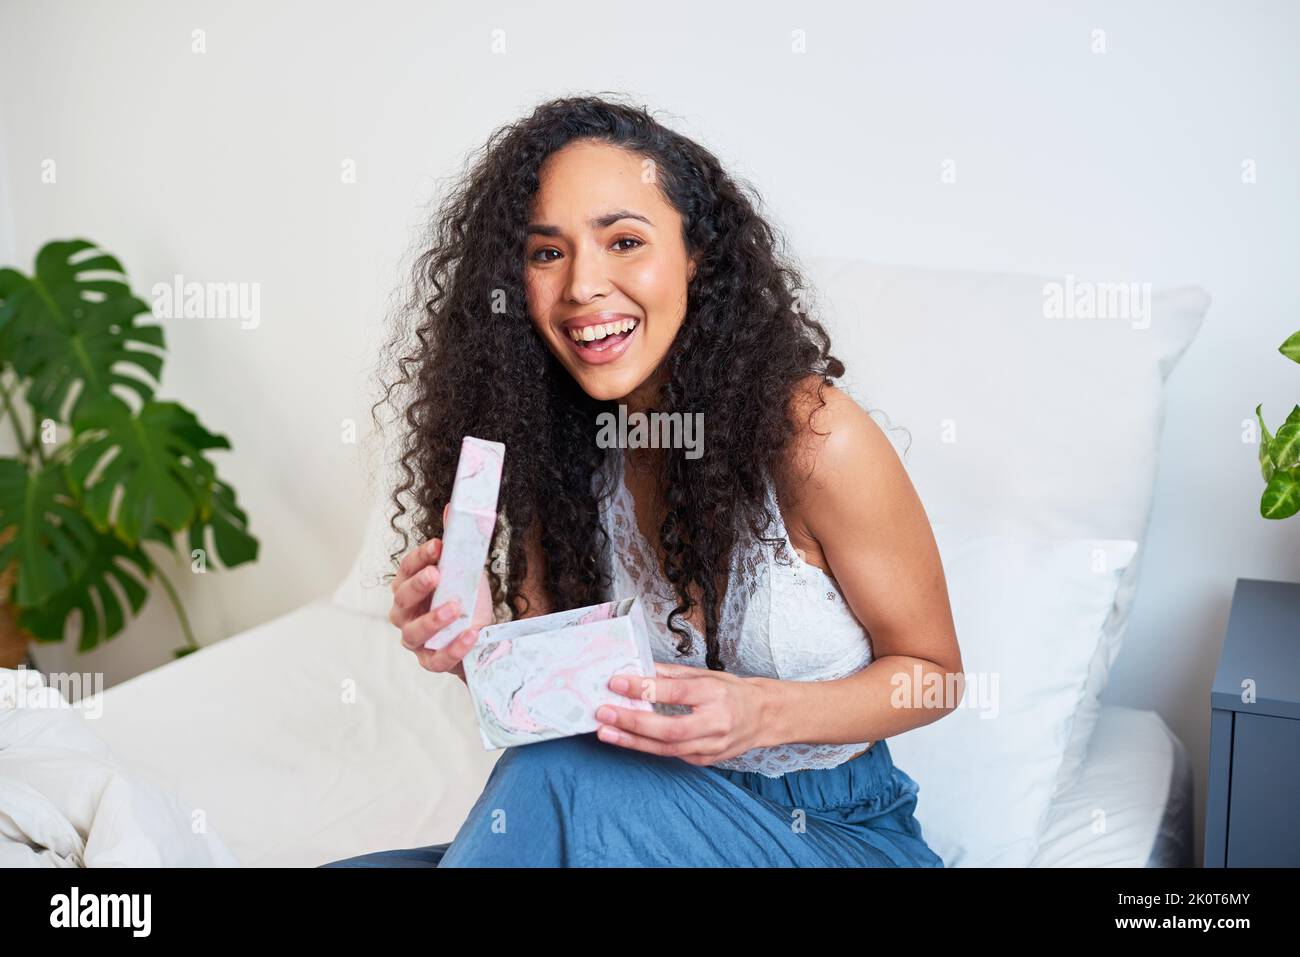 A beautiful young woman opens gift box present in bed at home Stock Photo